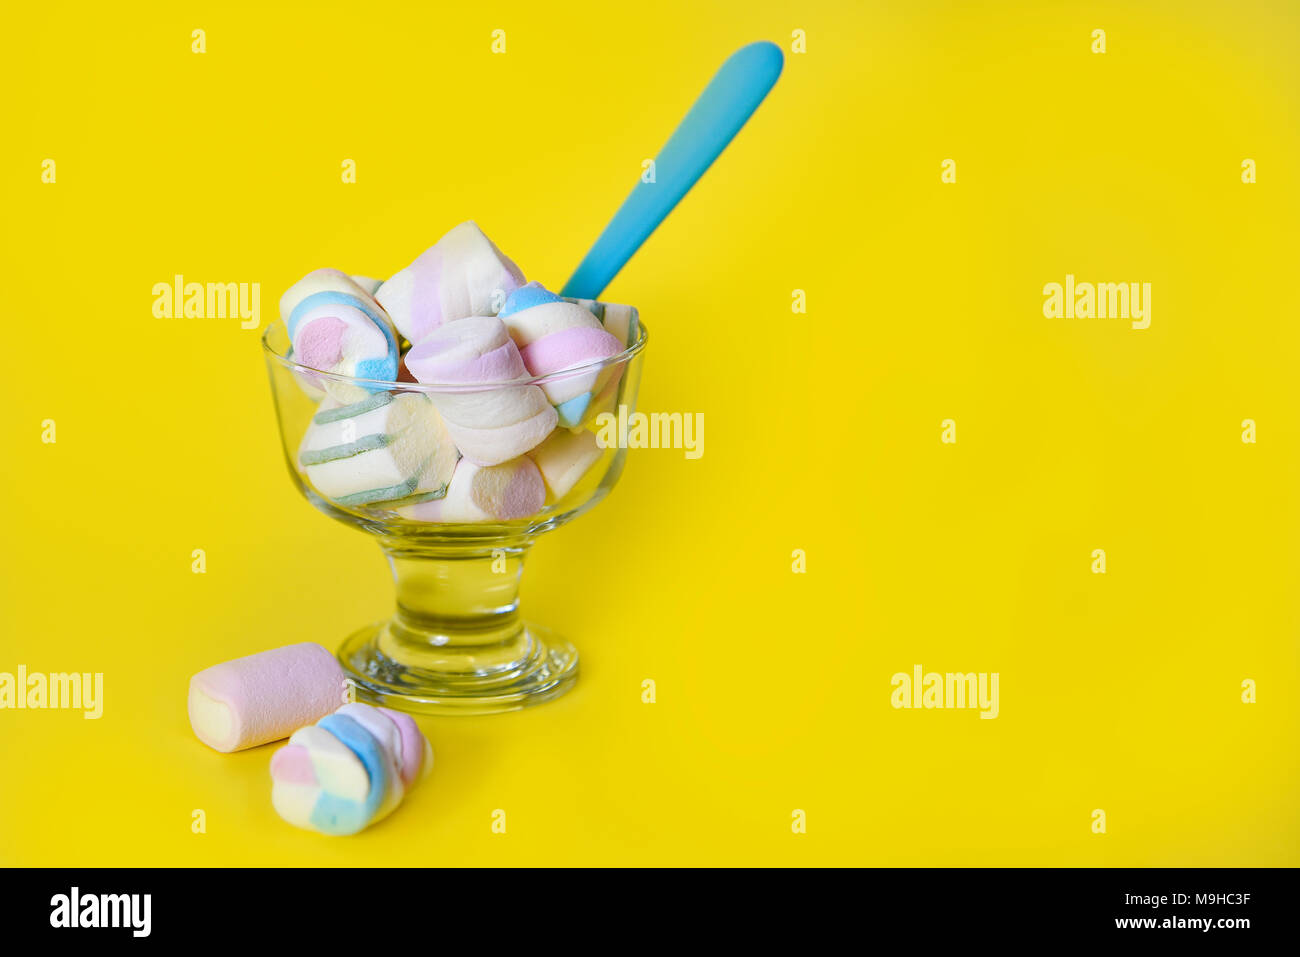 sweet marshmallows in a glass with a blue spoon, in a yellow background, with copy space Stock Photo